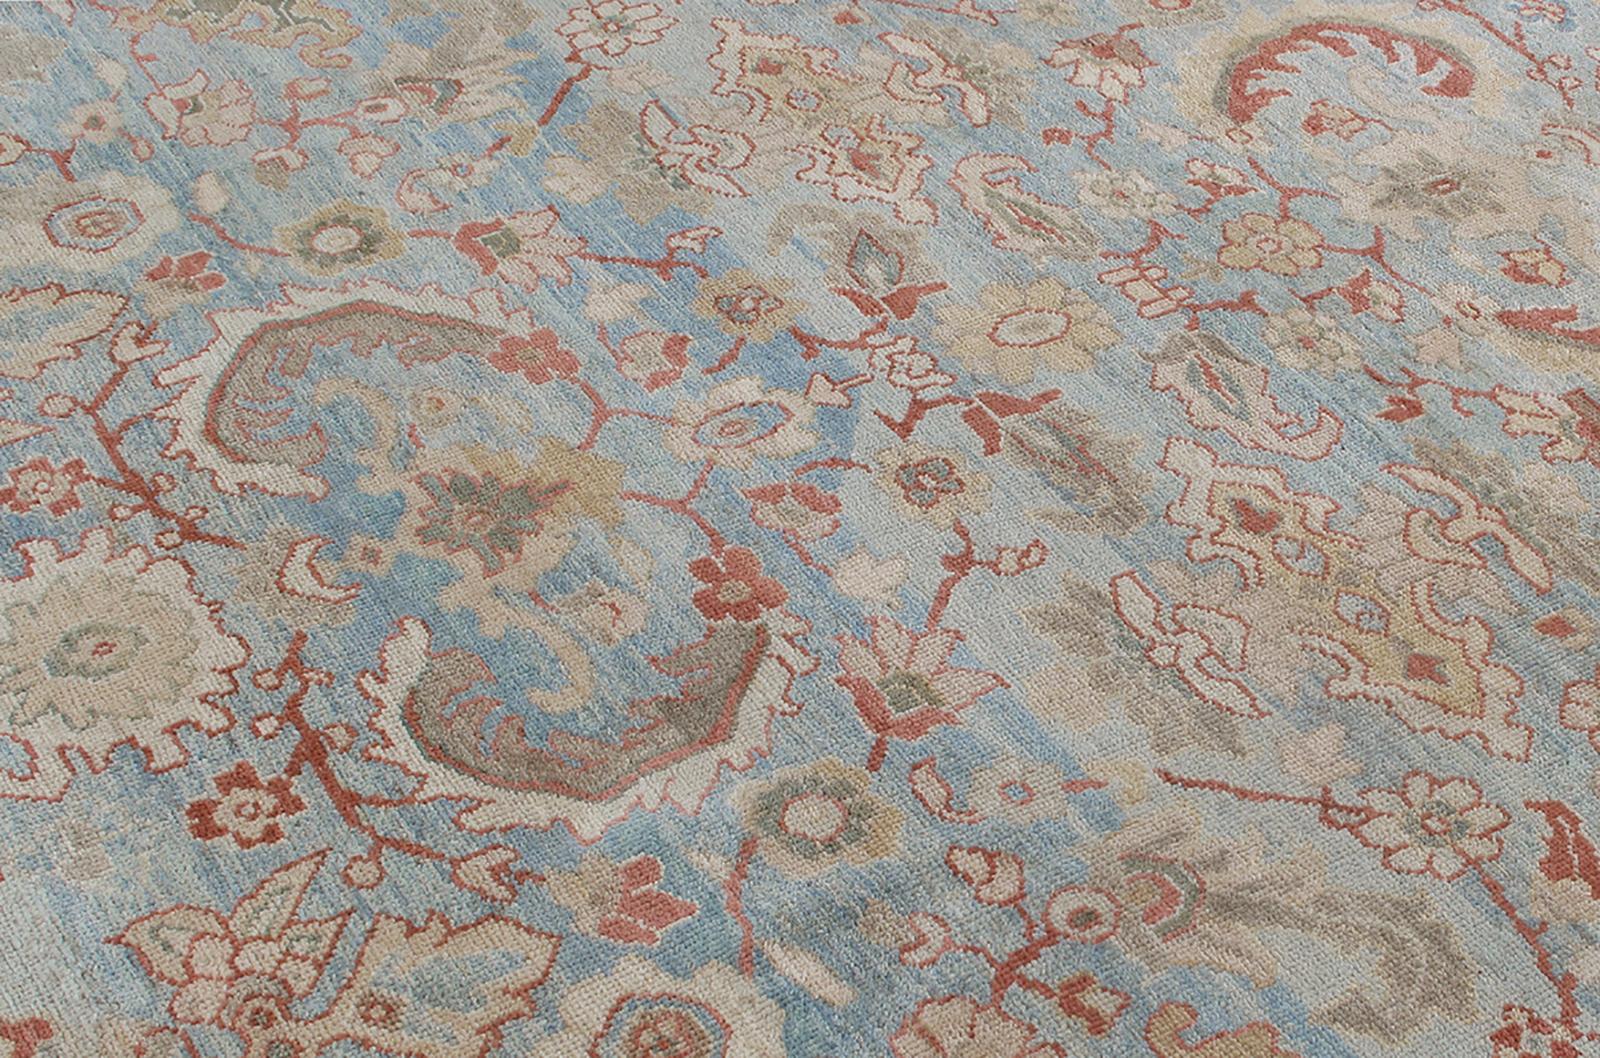 In 1875 the Anglo-Swiss company, Ziegler and Co., produced exquisite carpets in the Sultanabad region of western Persia. They married tradition with innovation by employing designers from New York and London to modify traditional designs to suit